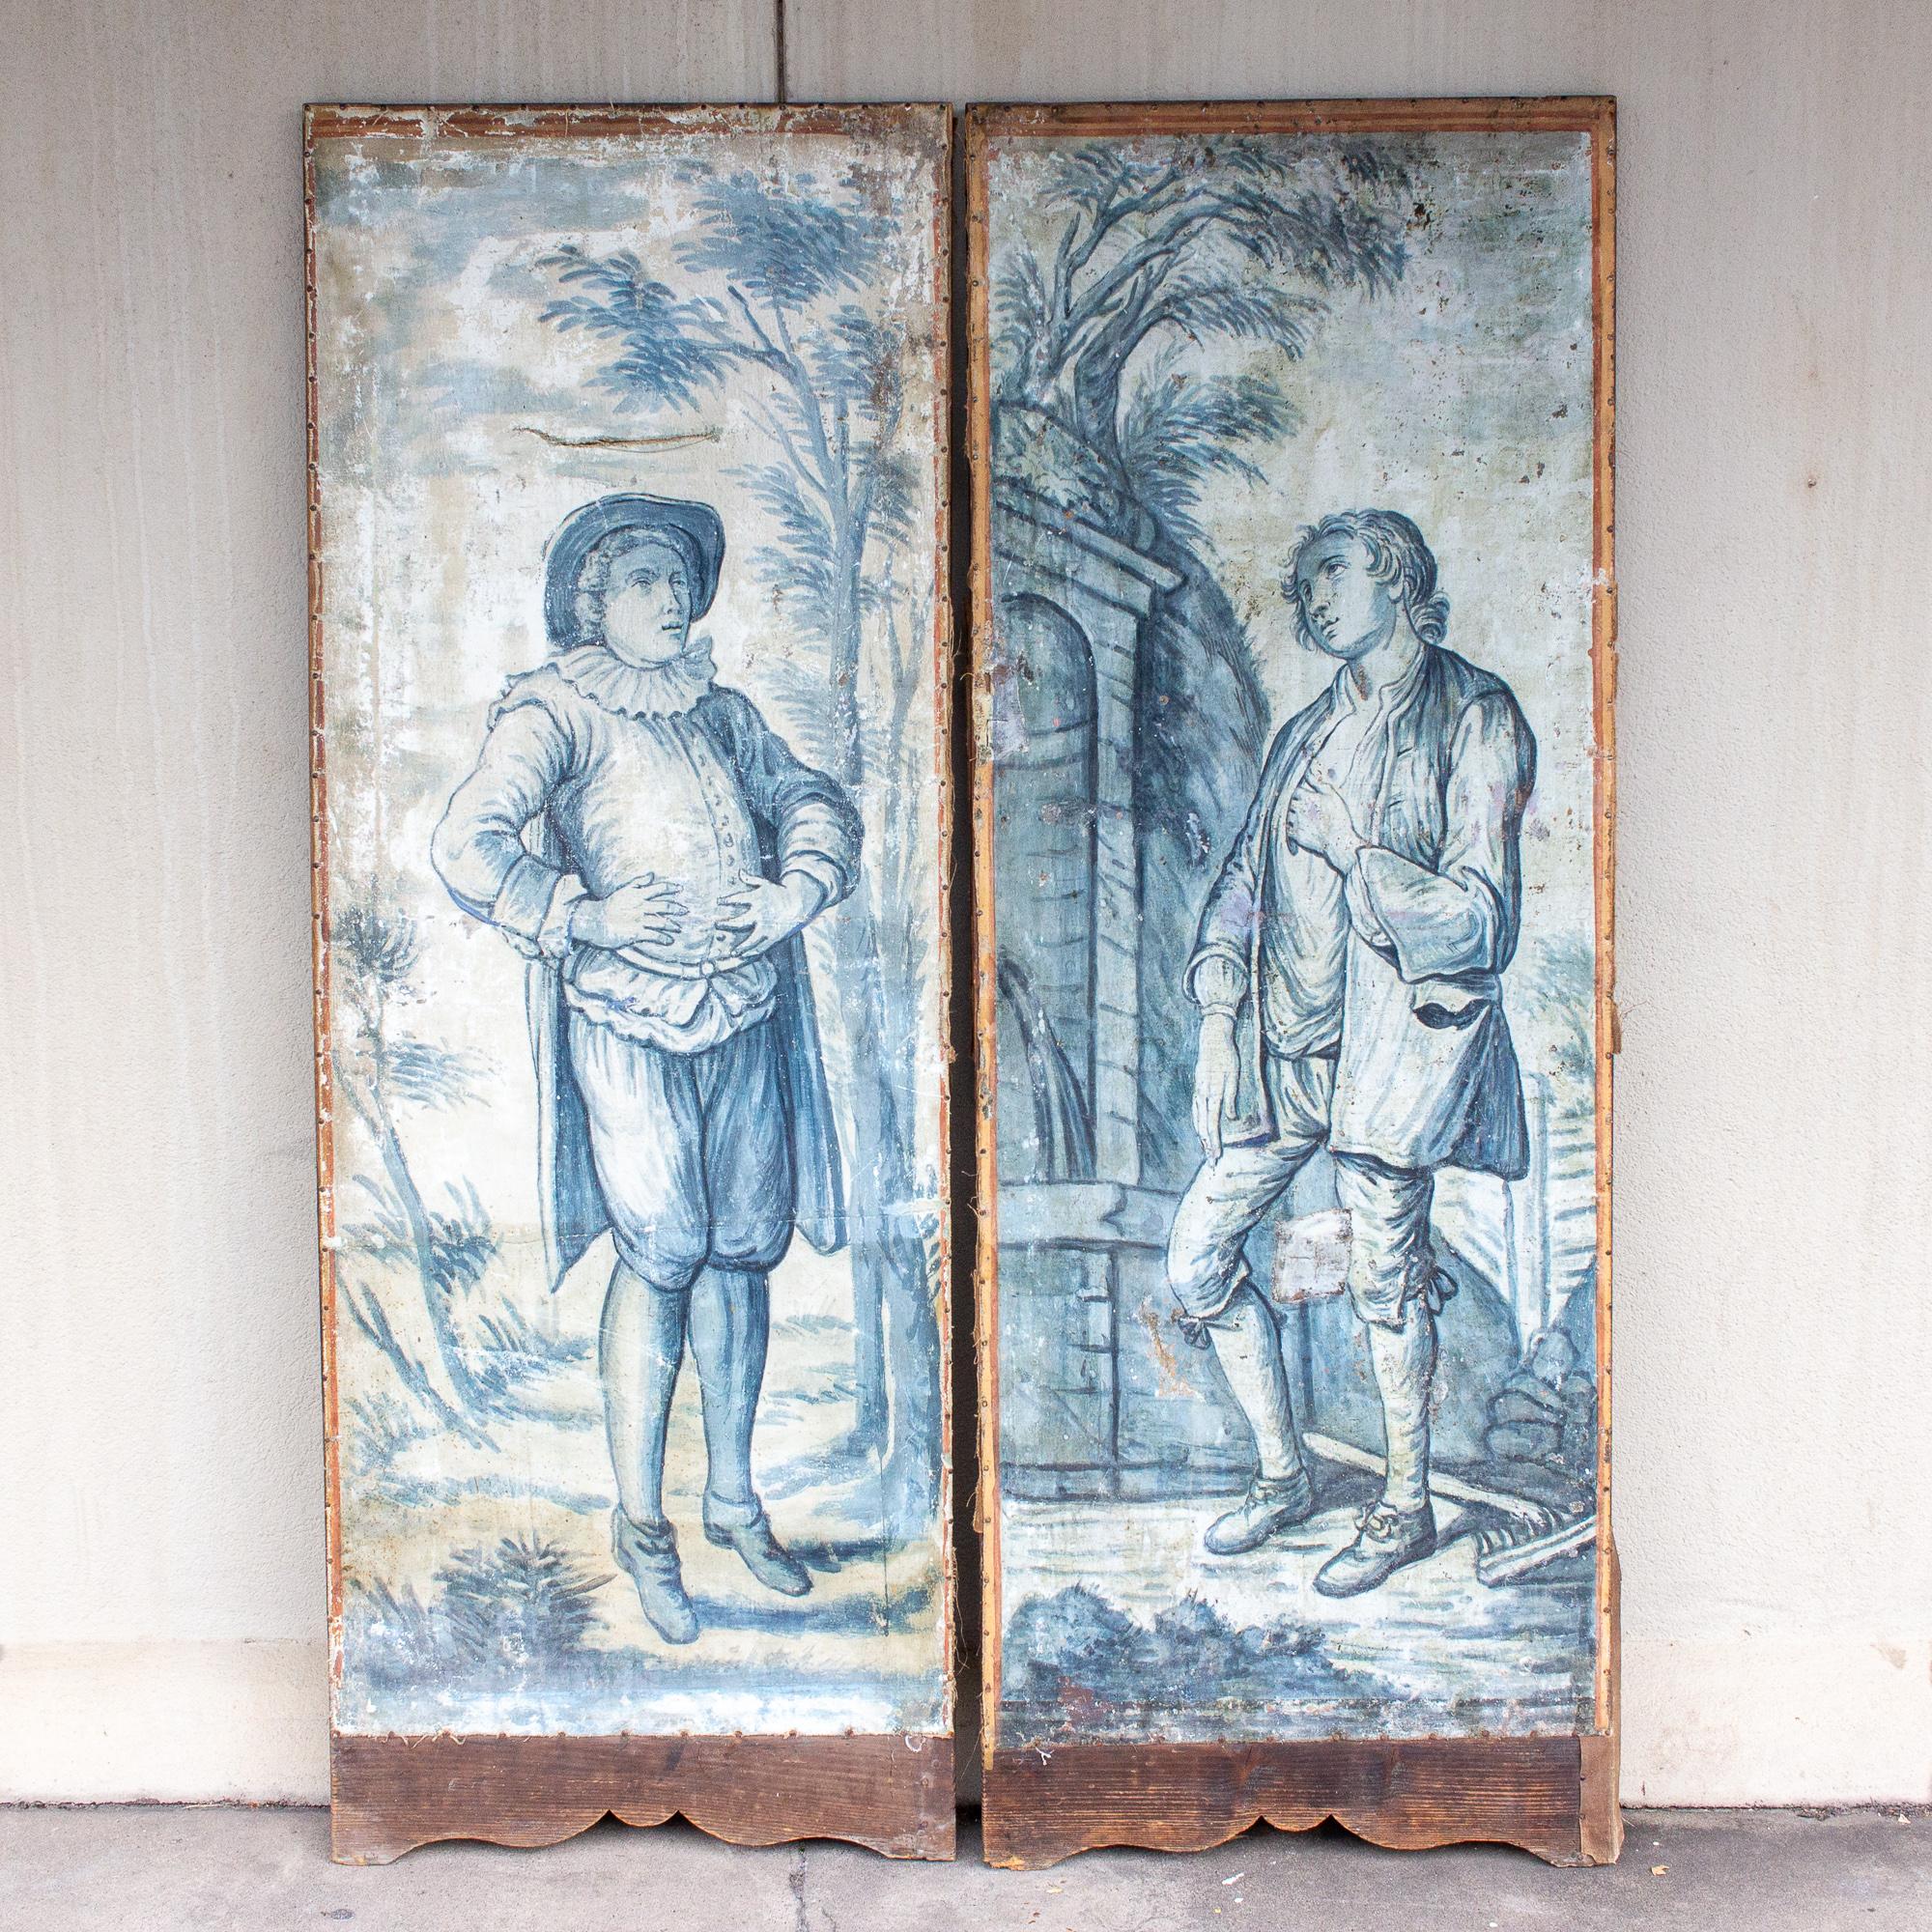 These charming panels were likely once a screen-style room divider and have been crafted with wood and hand painted canvas. The subject is two men in a landscape that is accented with plant-life and some architectural details. Based on the clothing